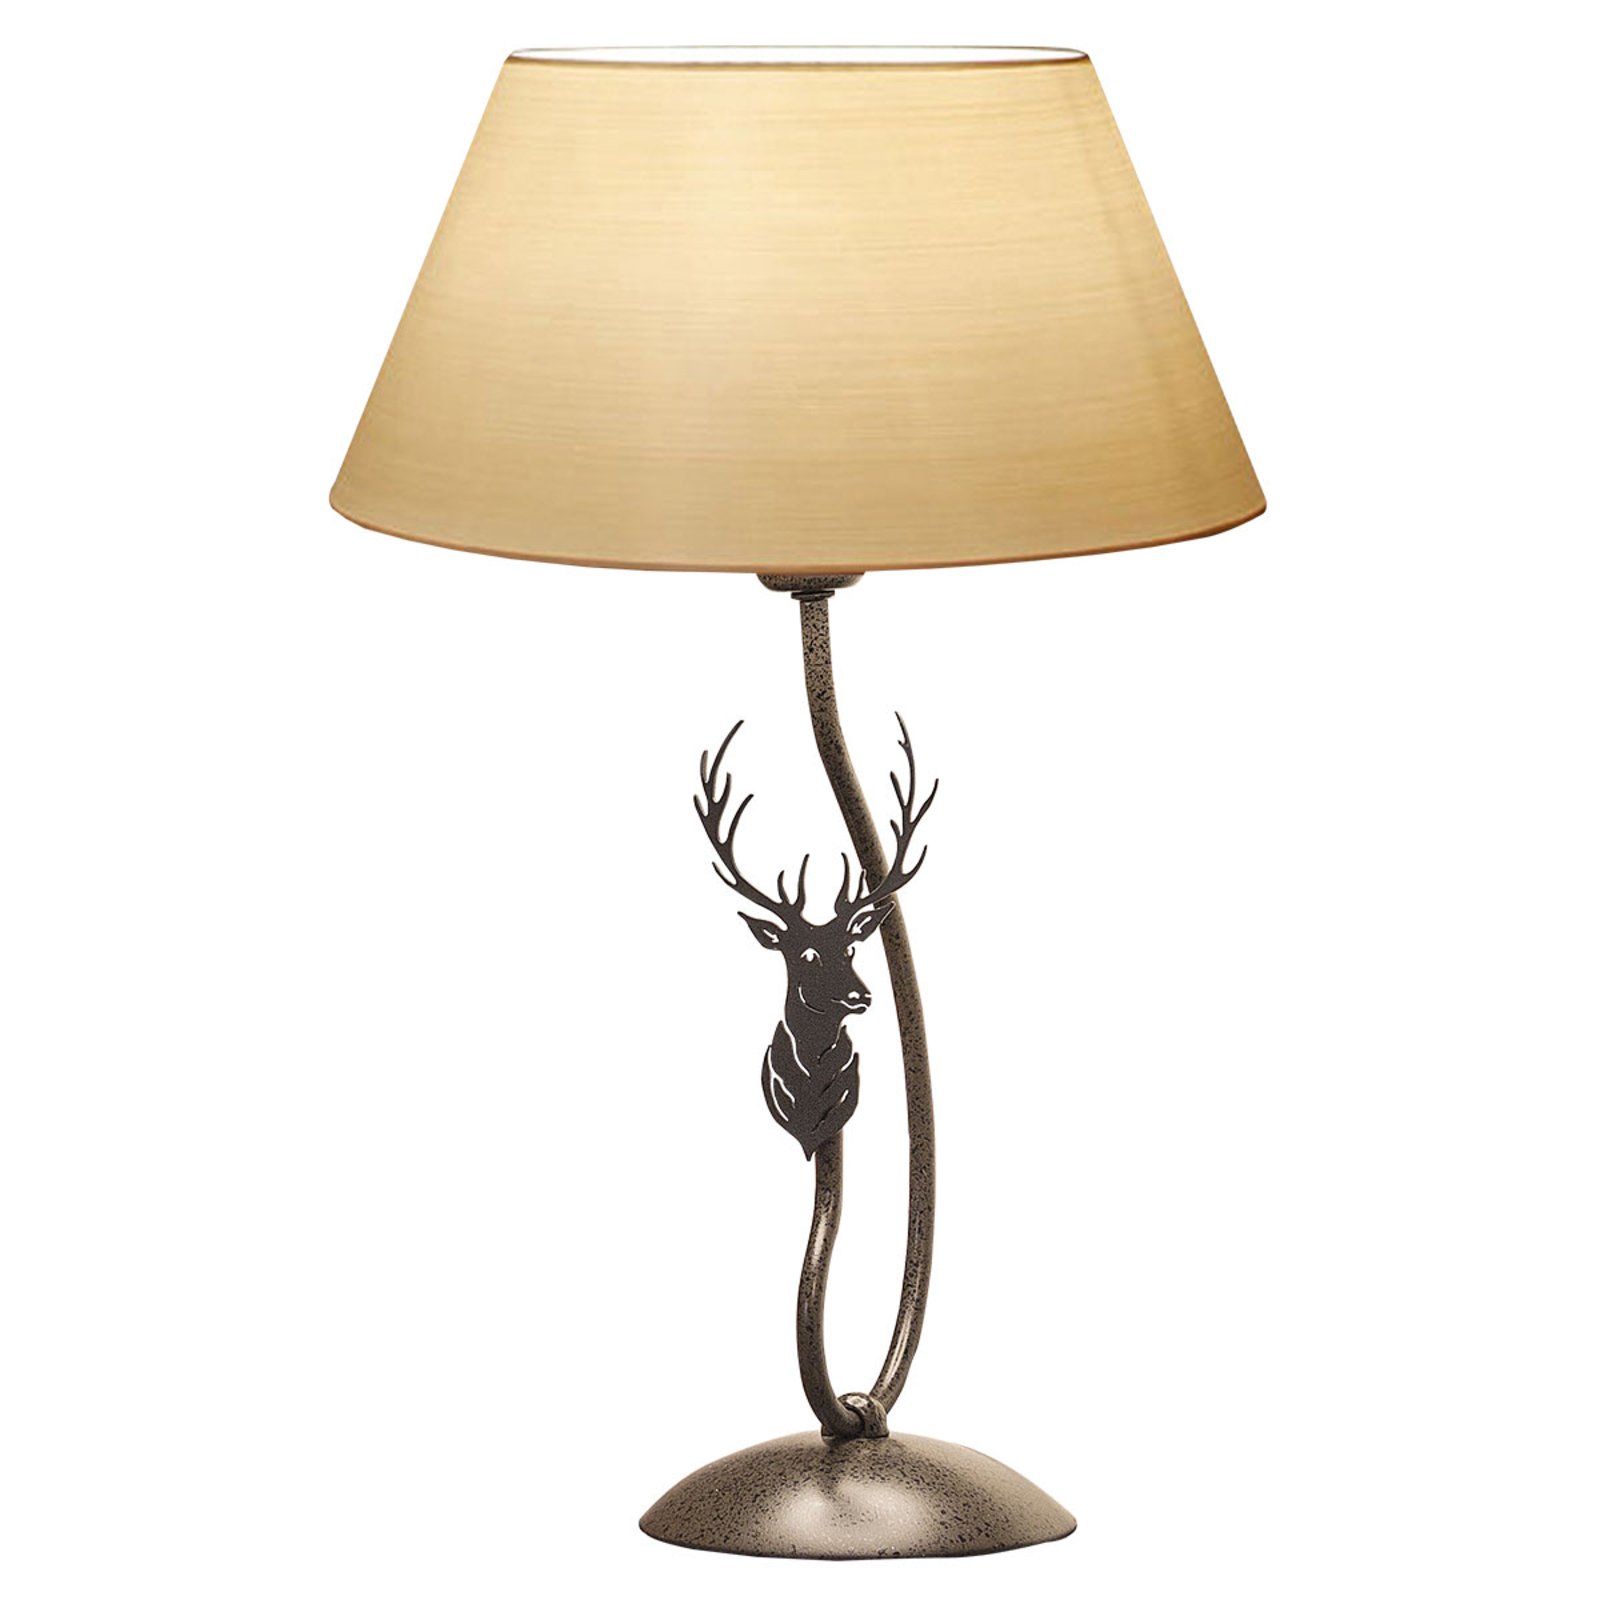 Menzel TH3361 Table lamp with deer motif